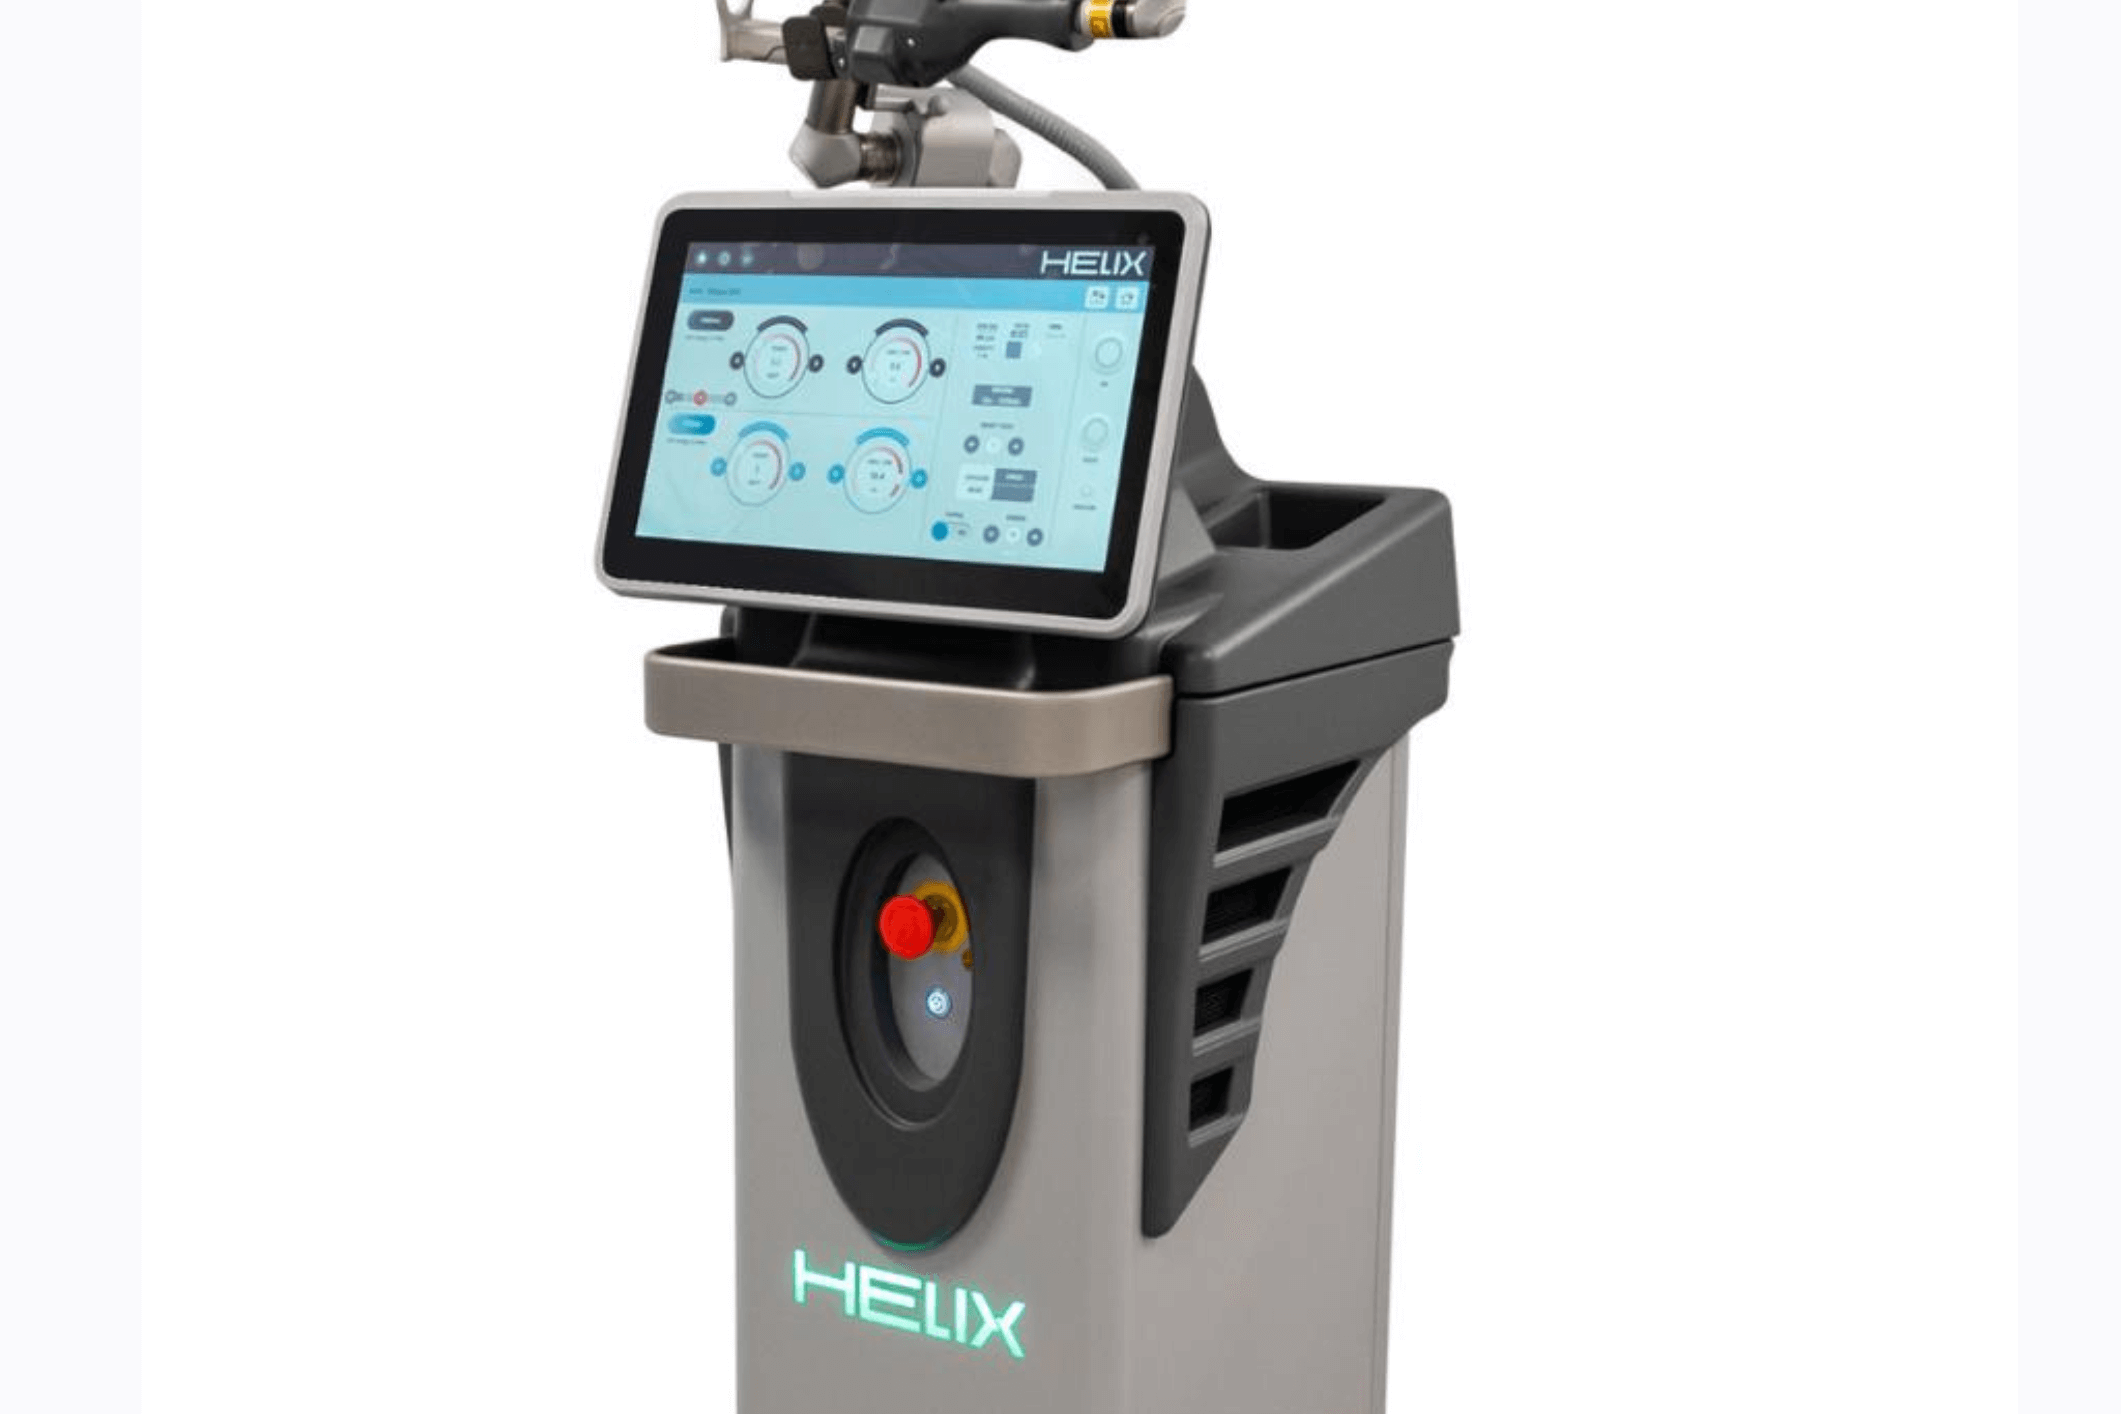 Helix is now available at K2 medicine